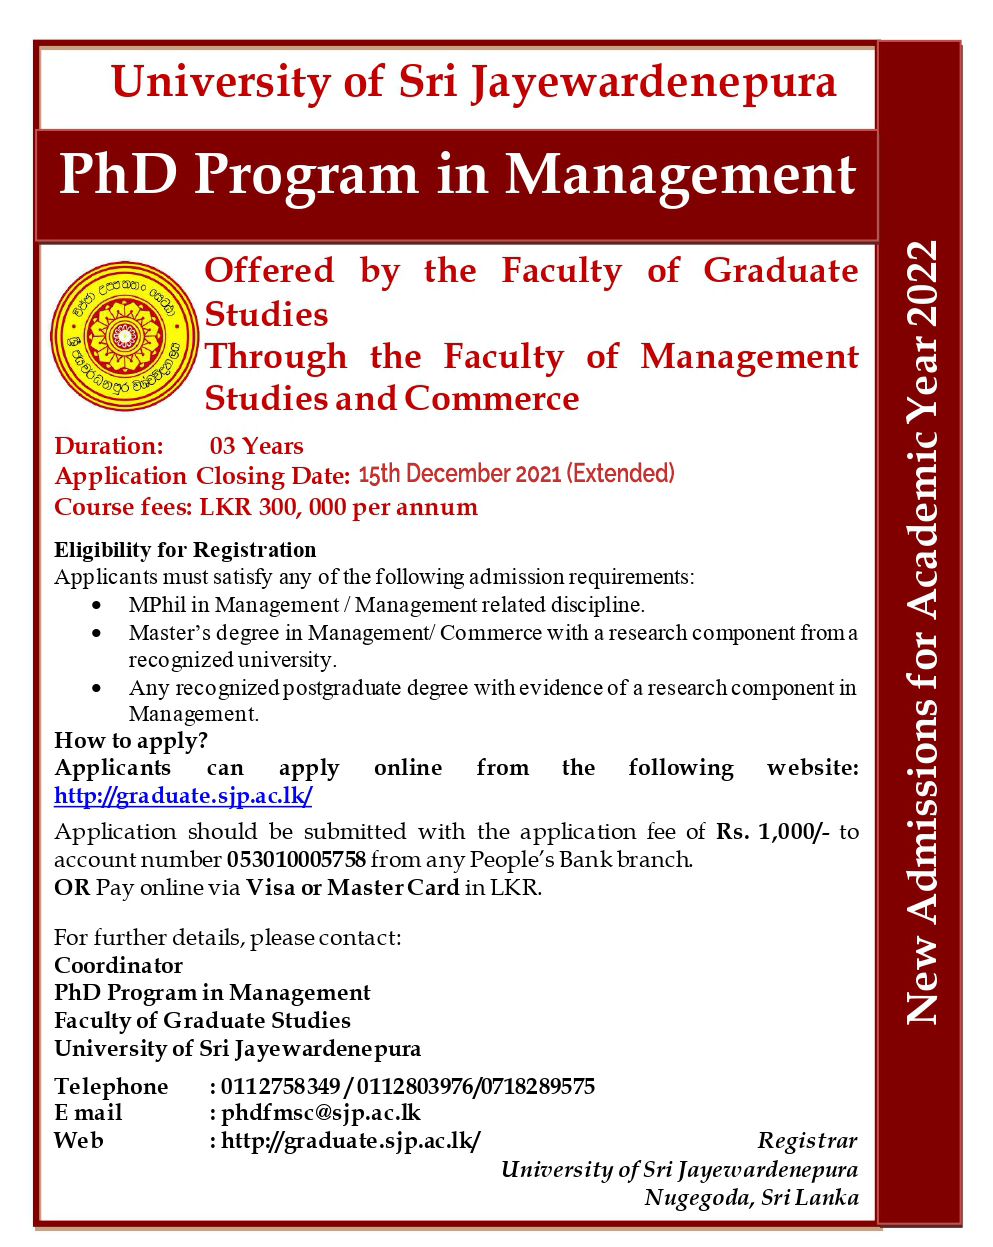 phd in management admission